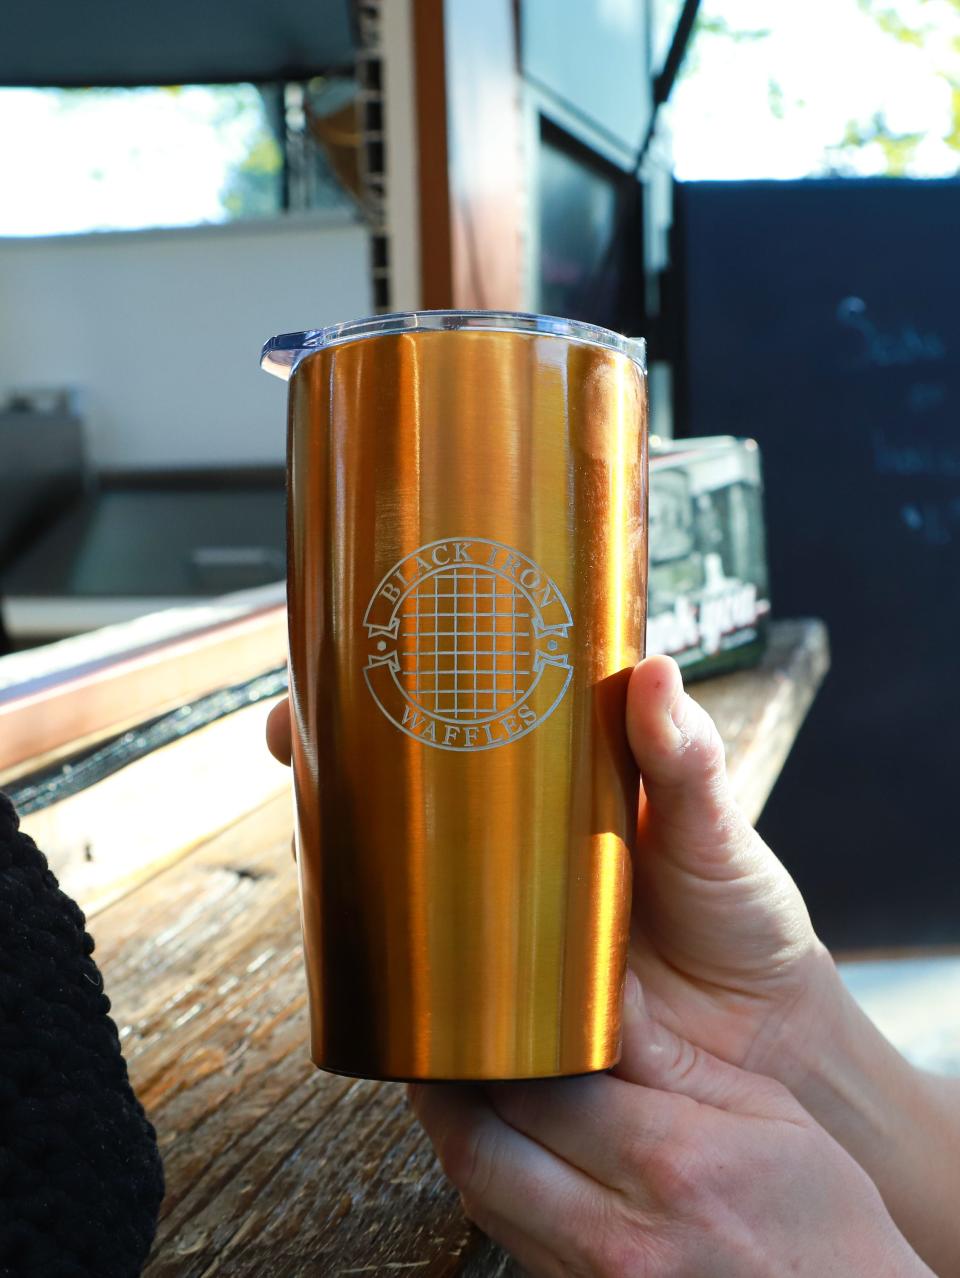 Black Iron Waffles has merchandise like this tumbler for sale. Chris Brockevelt, who is an architect by trade, designed the logo himself.